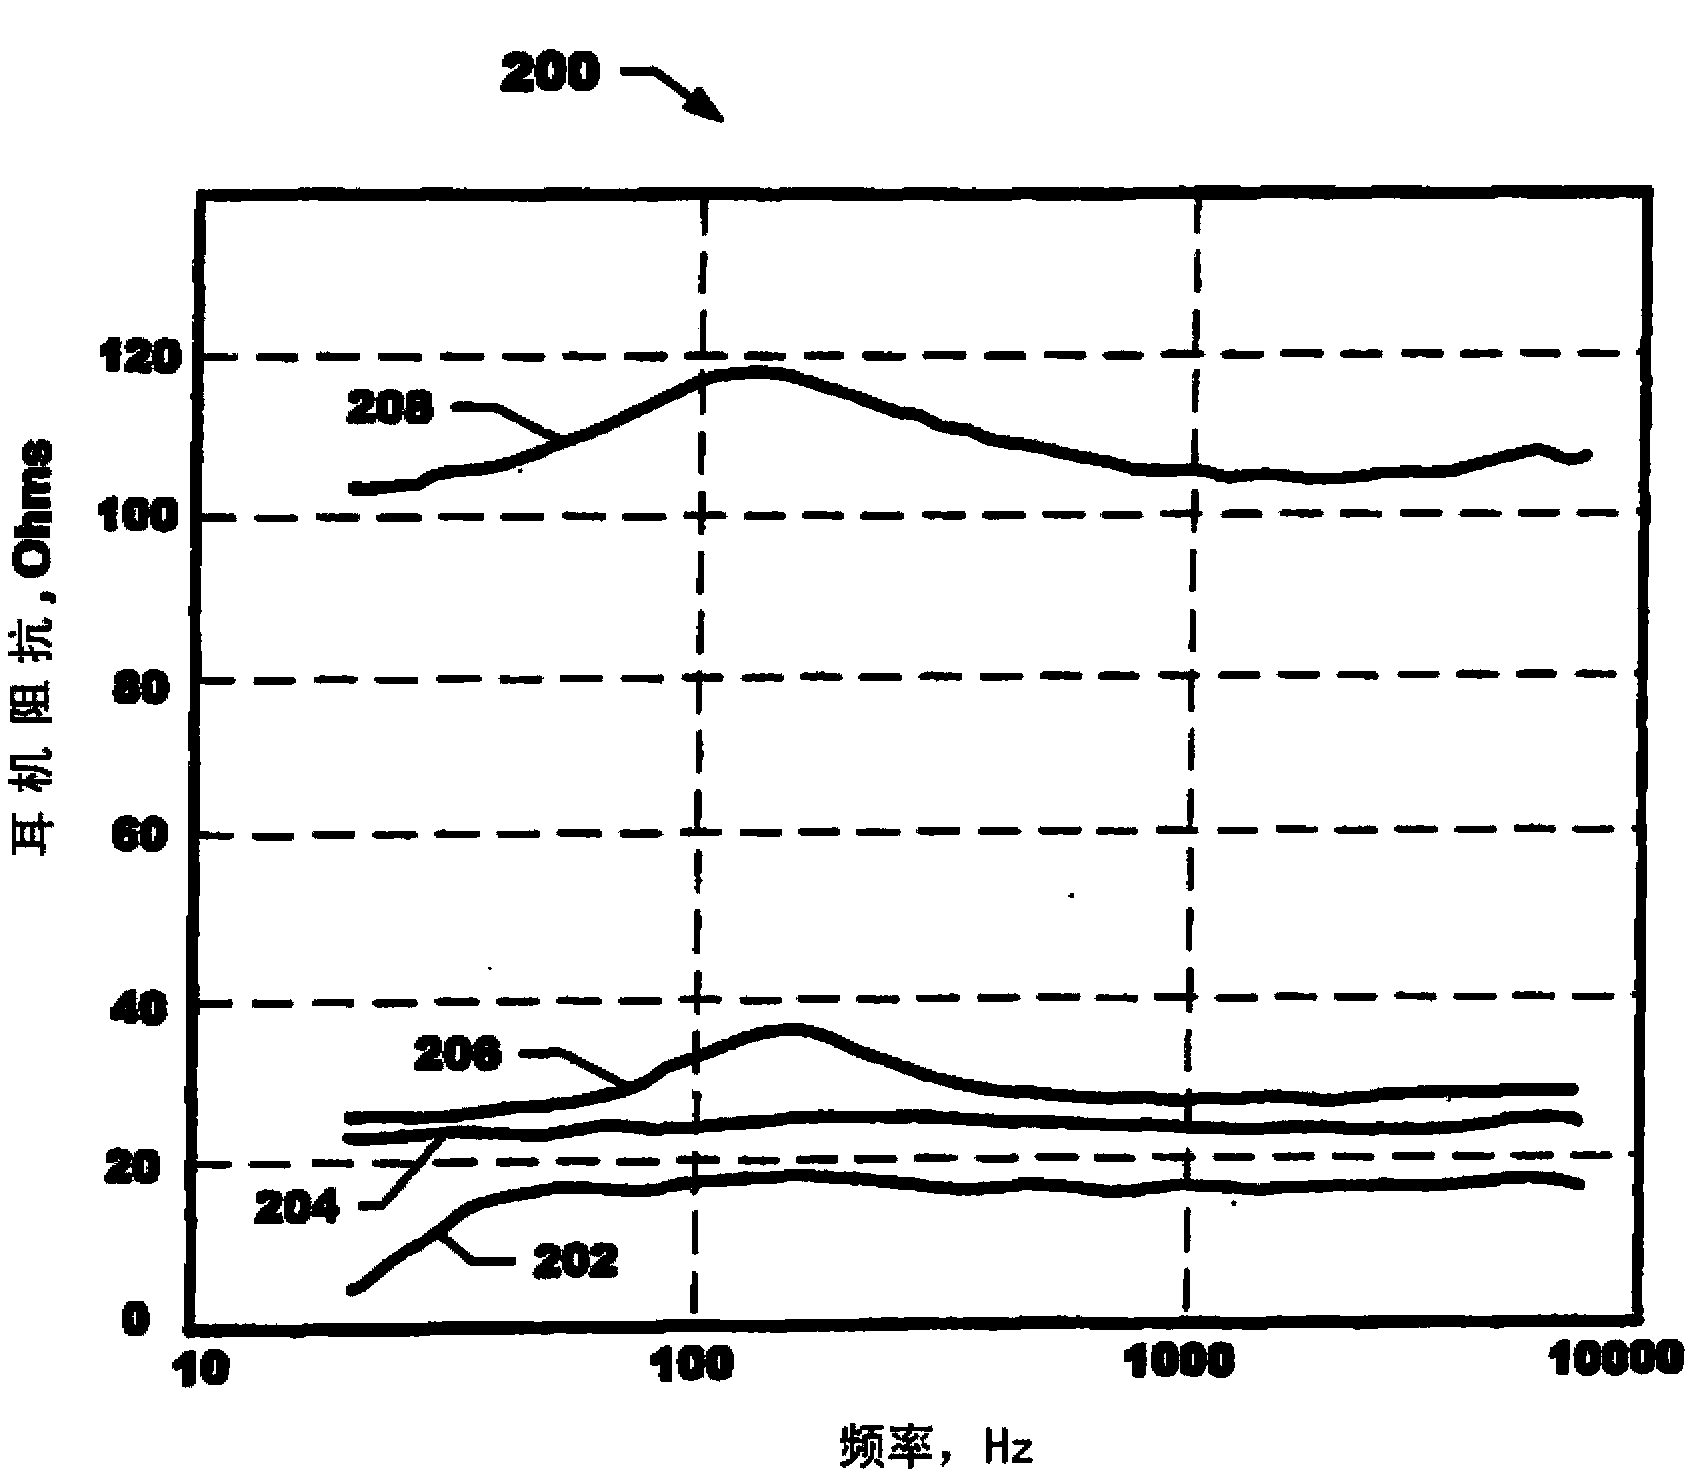 System and method for optimized playback of audio signals through headphones